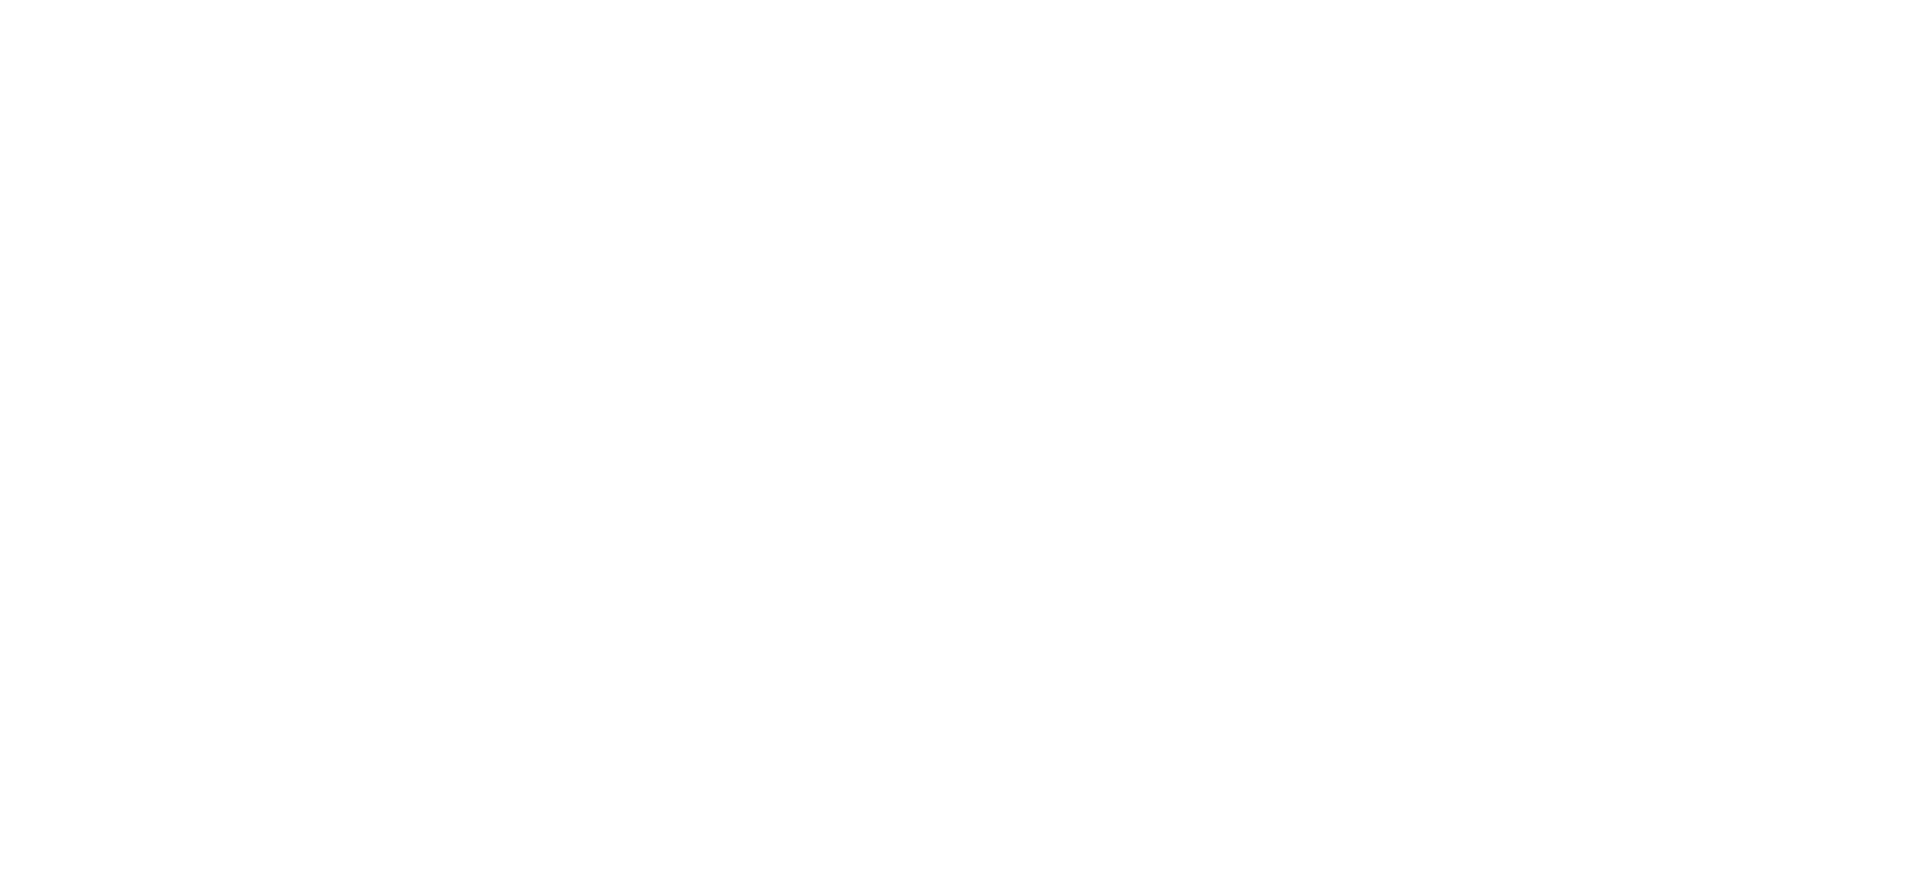 https://theherbary.com/wp-content/uploads/2021/11/The-Herbery-white-01.png